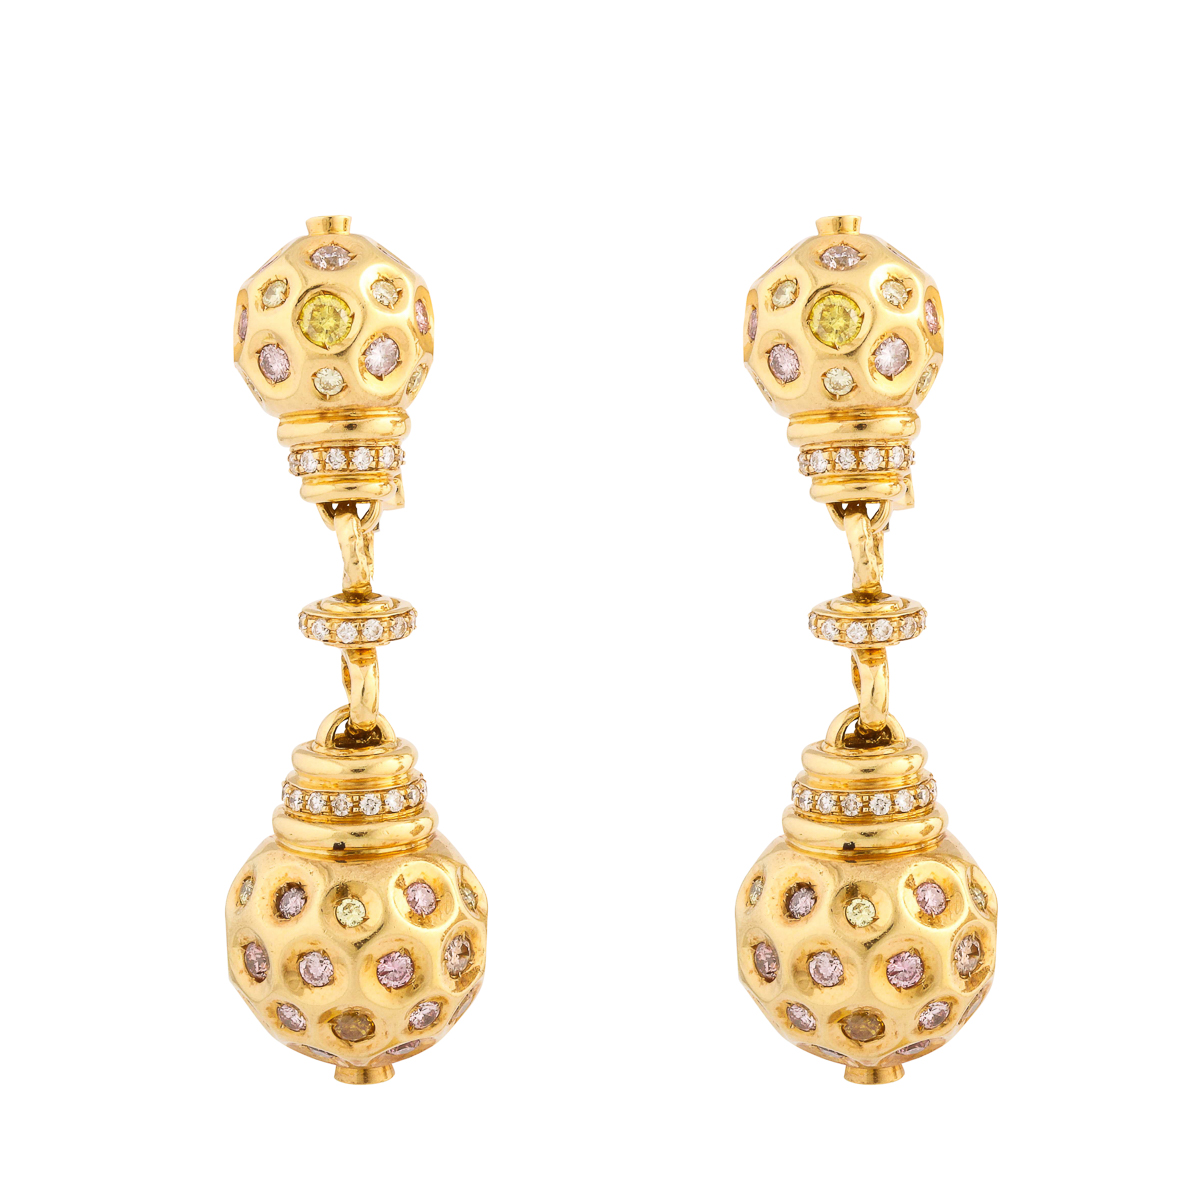 gold spherical pendant earrings set with white, yellow, and pink diamonds